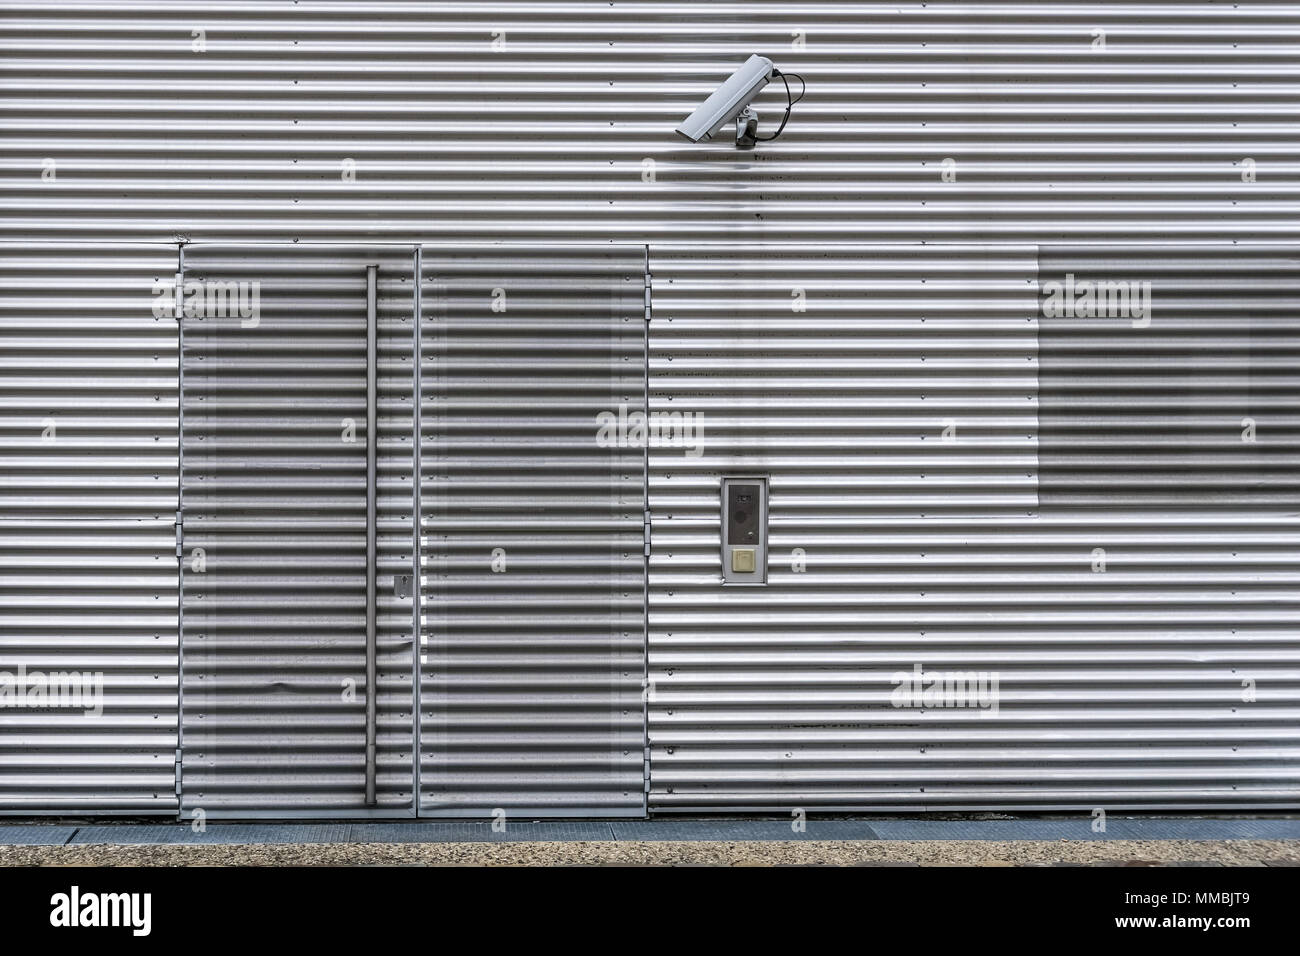 Exterior video surveillance and security system with CCTV camera on a corrugated iron wall to watch over the entrance of the building. Stock Photo